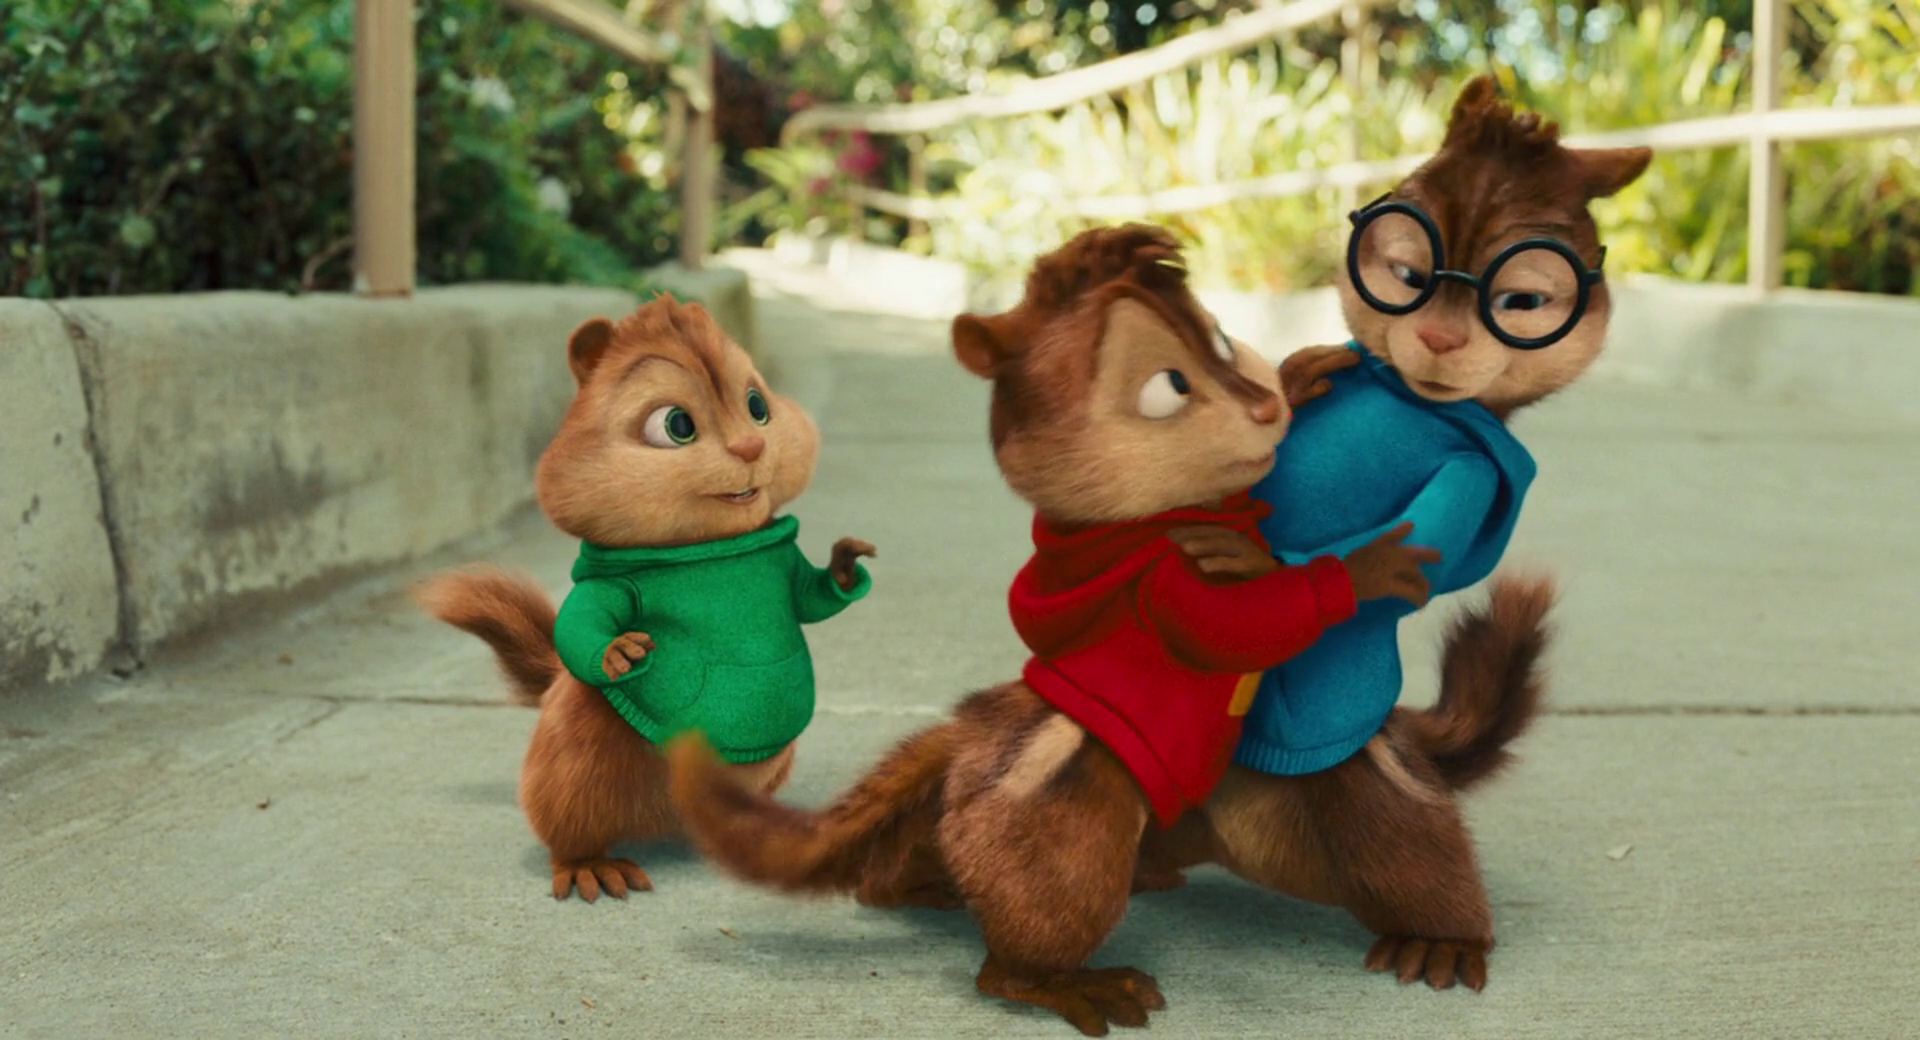 ẢNH CỦA PHIM Alvin and the Chipmunks: The Squeakquel.